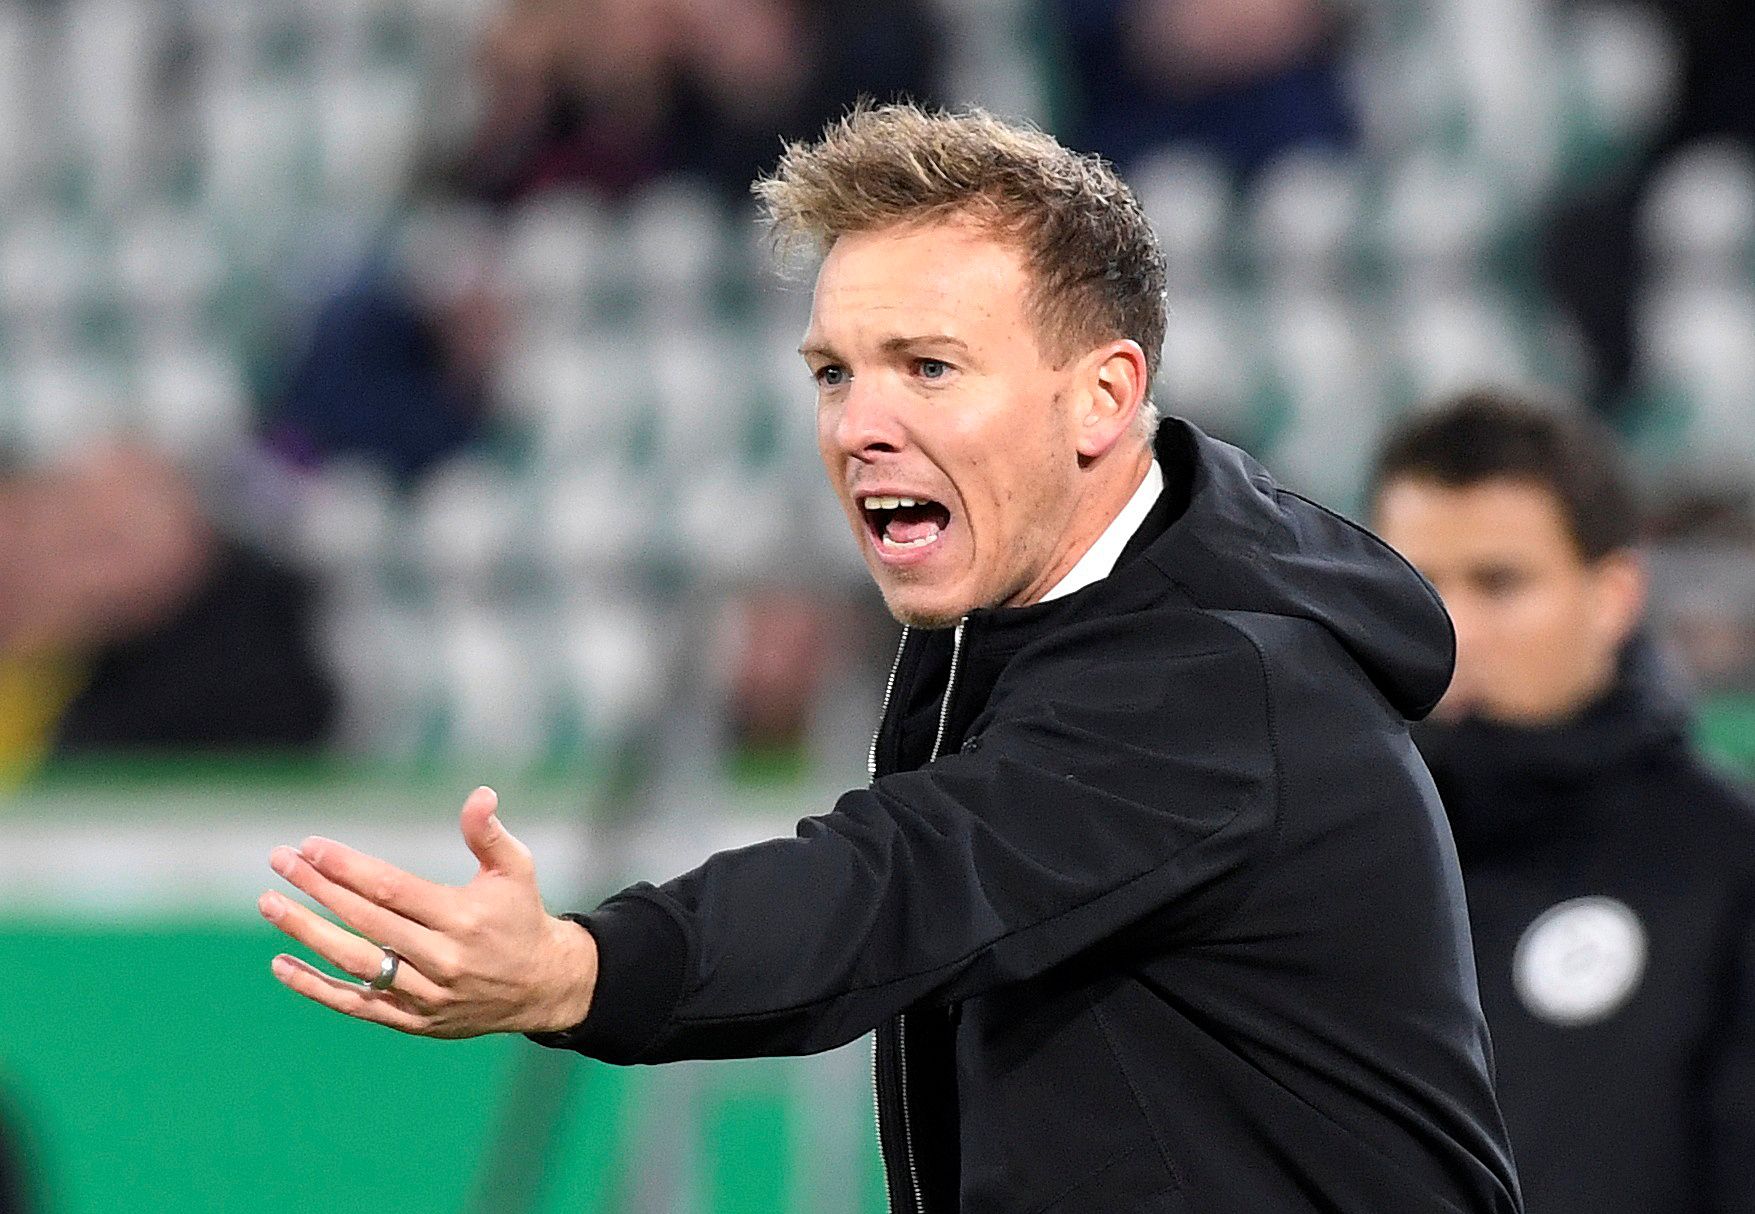 Soccer Football - DFB Cup - Second Round - VfL Wolfsburg v RB Leipzig - Volkswagen Arena, Wolfsburg, Germany - October 30, 2019  RB Leipzig coach Julian Nagelsmann  REUTERS/Fabian Bimmer  DFB regulations prohibit any use of photographs as image sequences and/or quasi-video